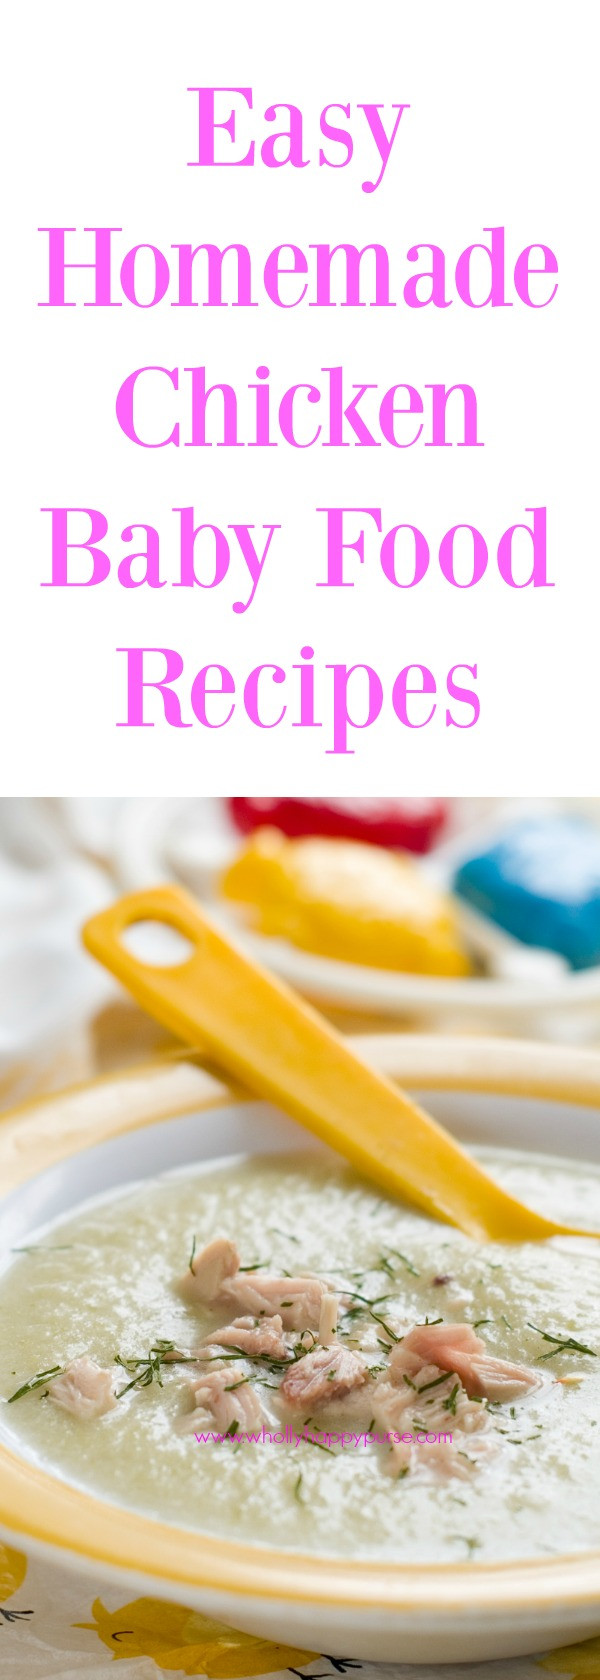 Chicken Baby Food Recipe
 Chicken Baby Food Recipes WHP